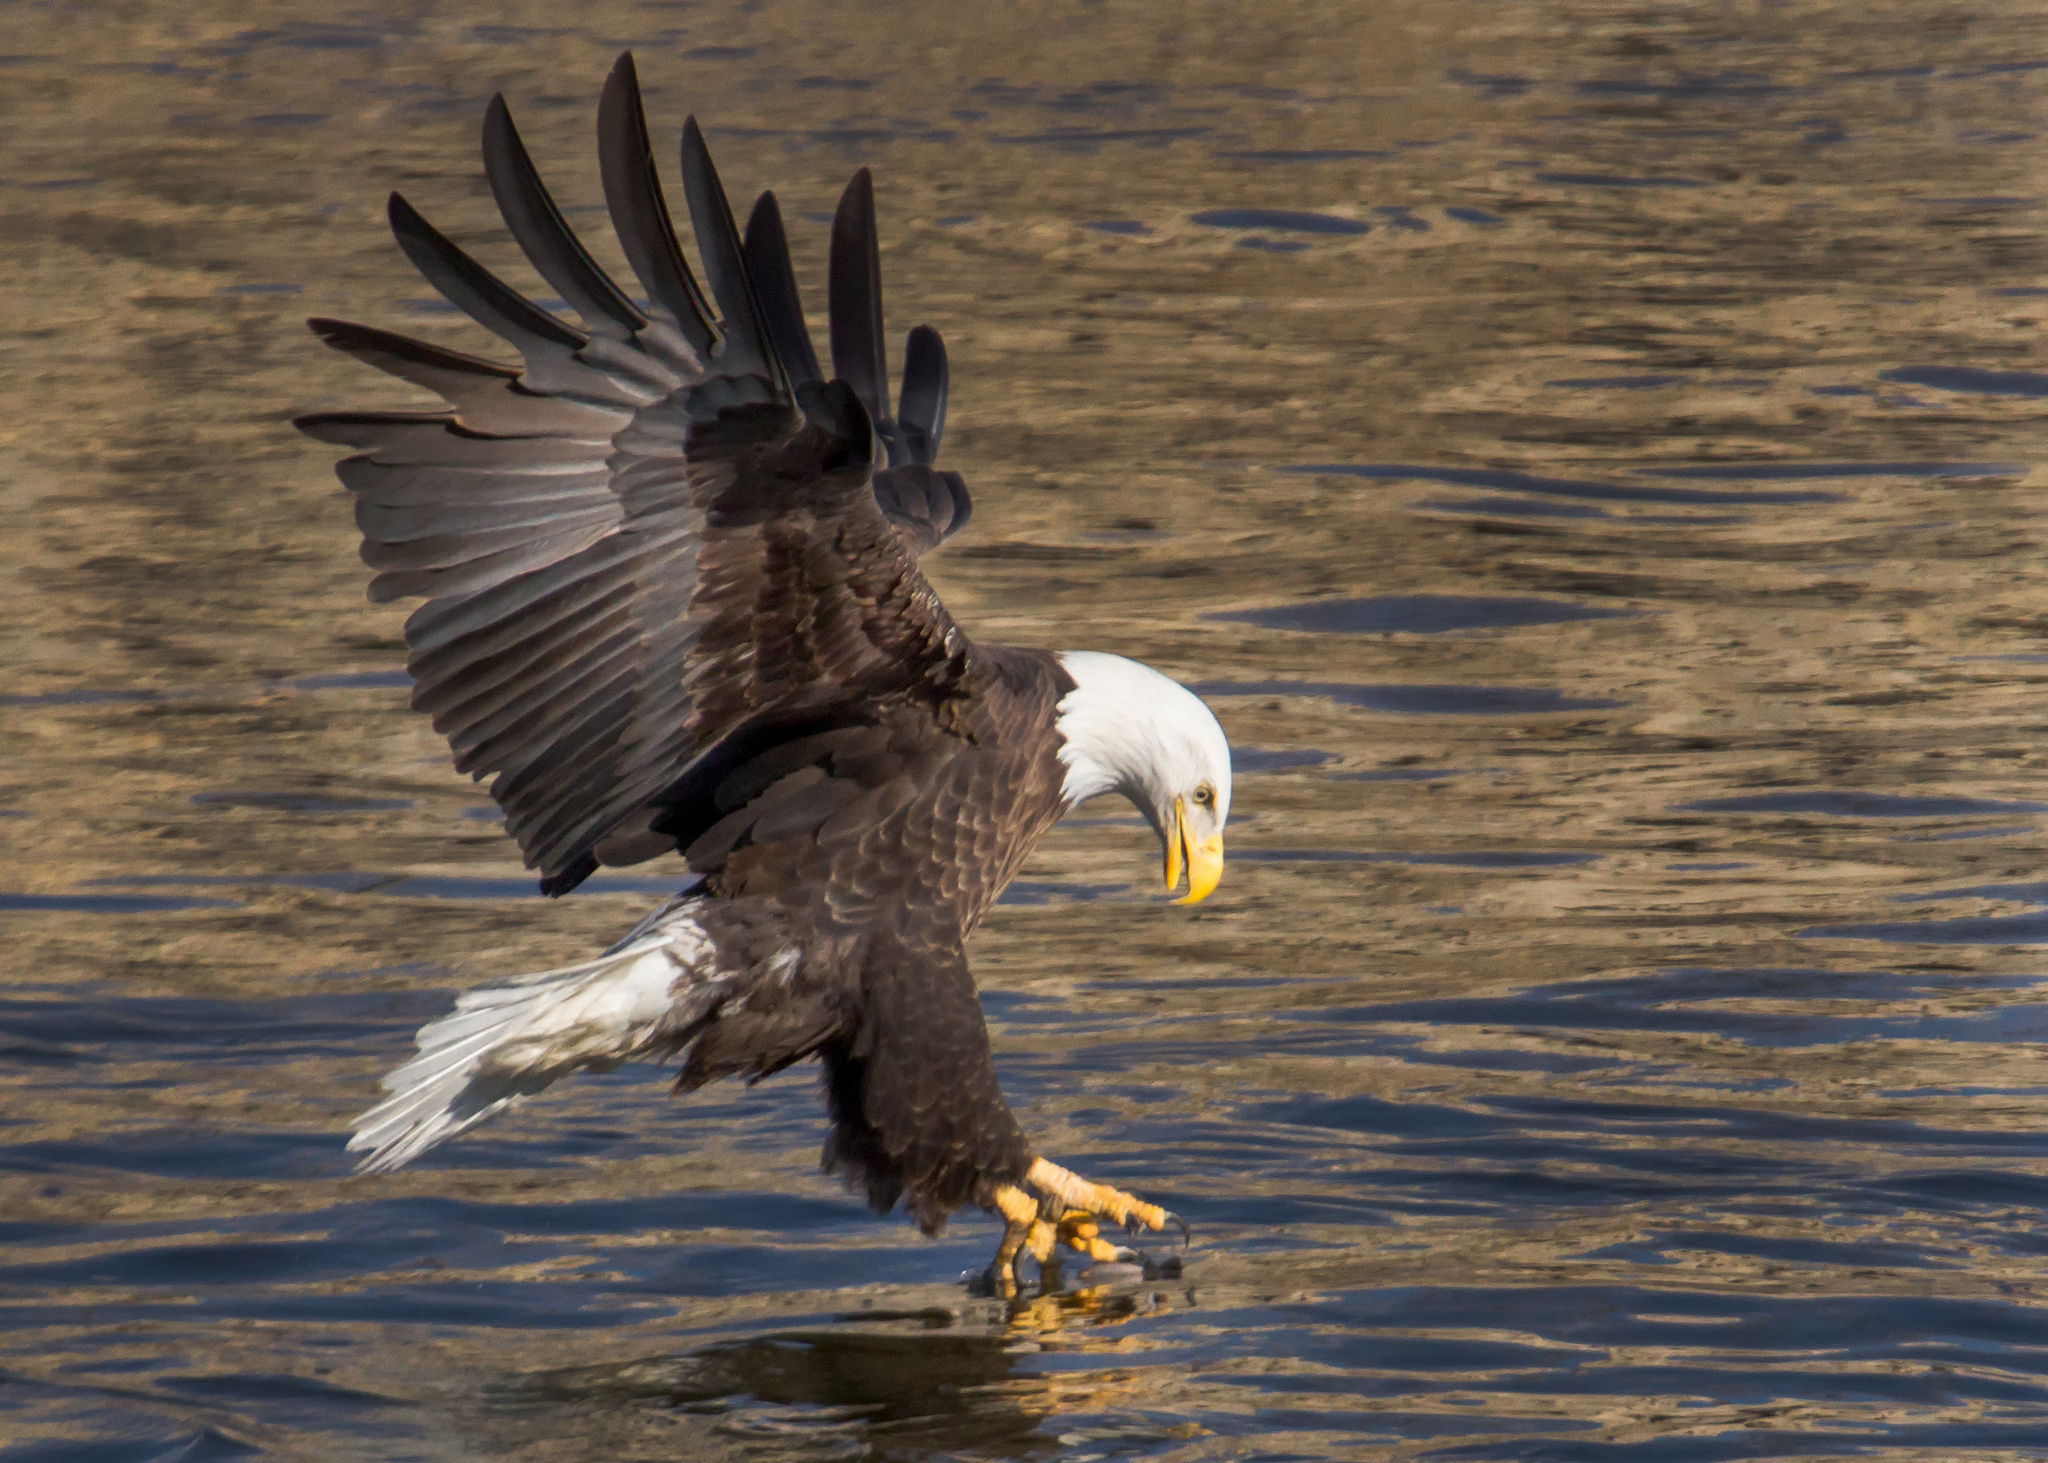 Eagle diving for fish